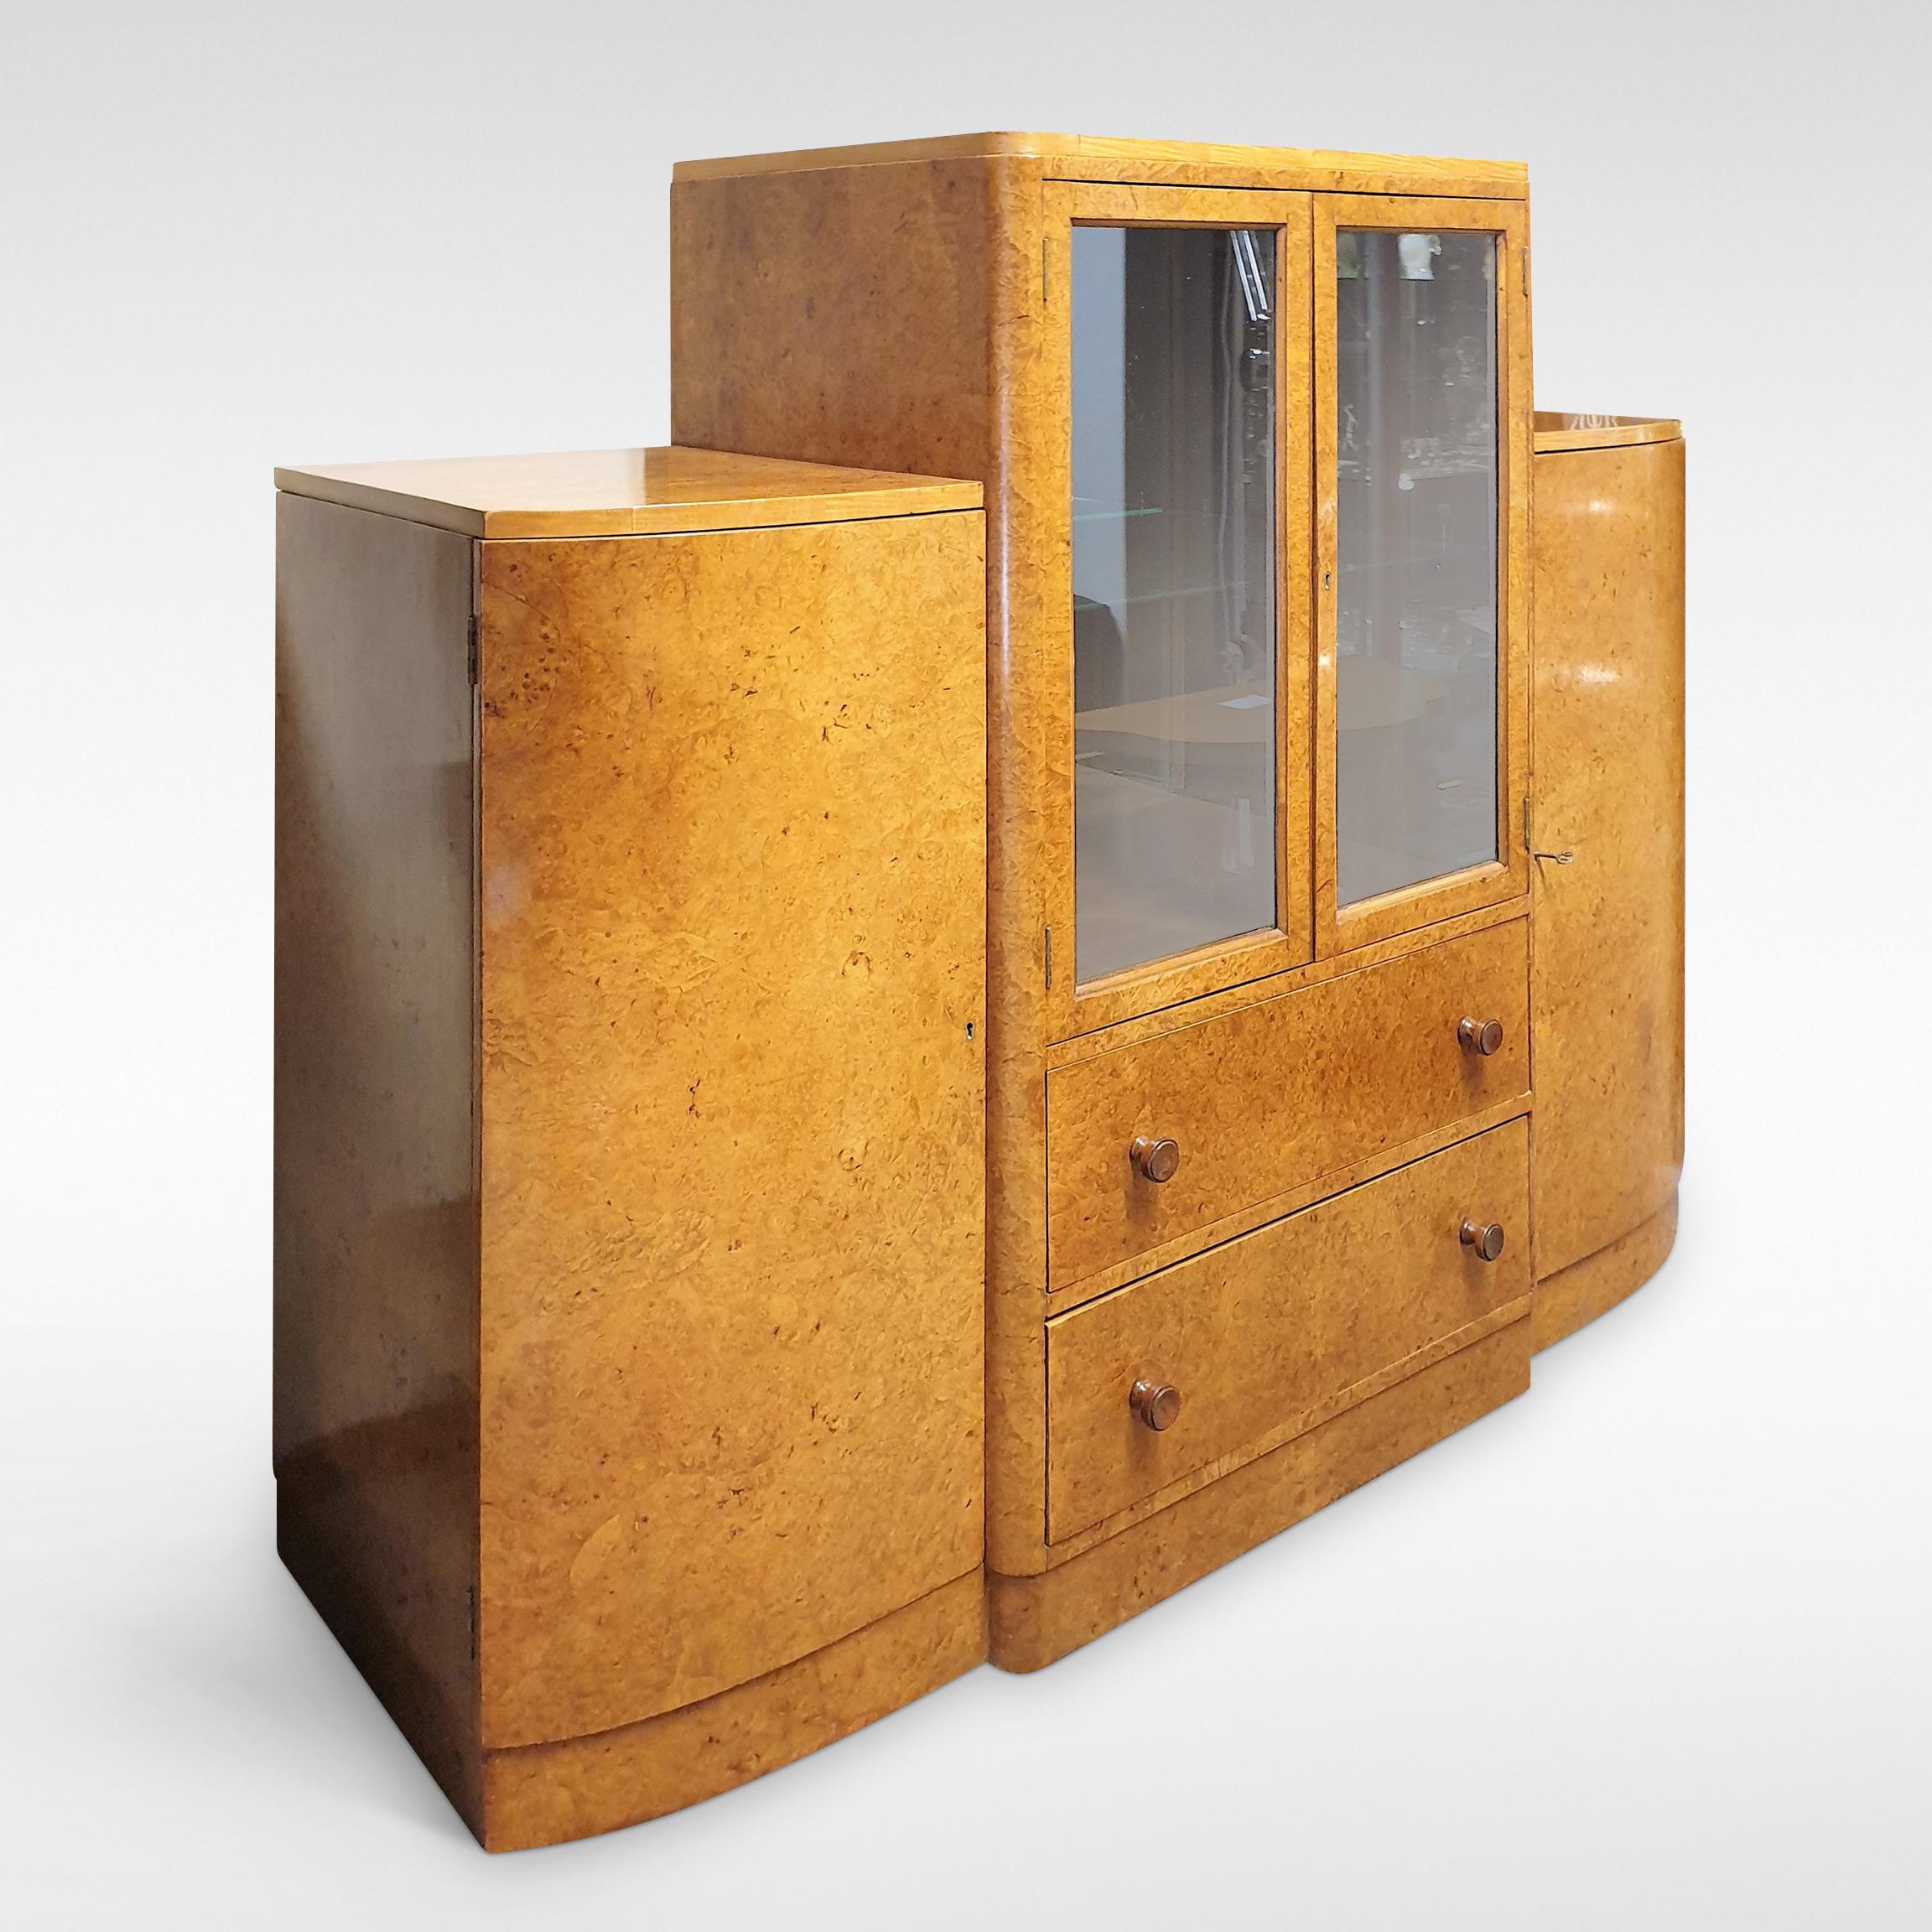 Art Deco display cabinet in burr walnut veneers. Mirrored interior, with drawers under and flanking cupboards, circa 1935-1955

Price includes full restoration using traditional techniques & materials. Please allow 6-8 weeks.